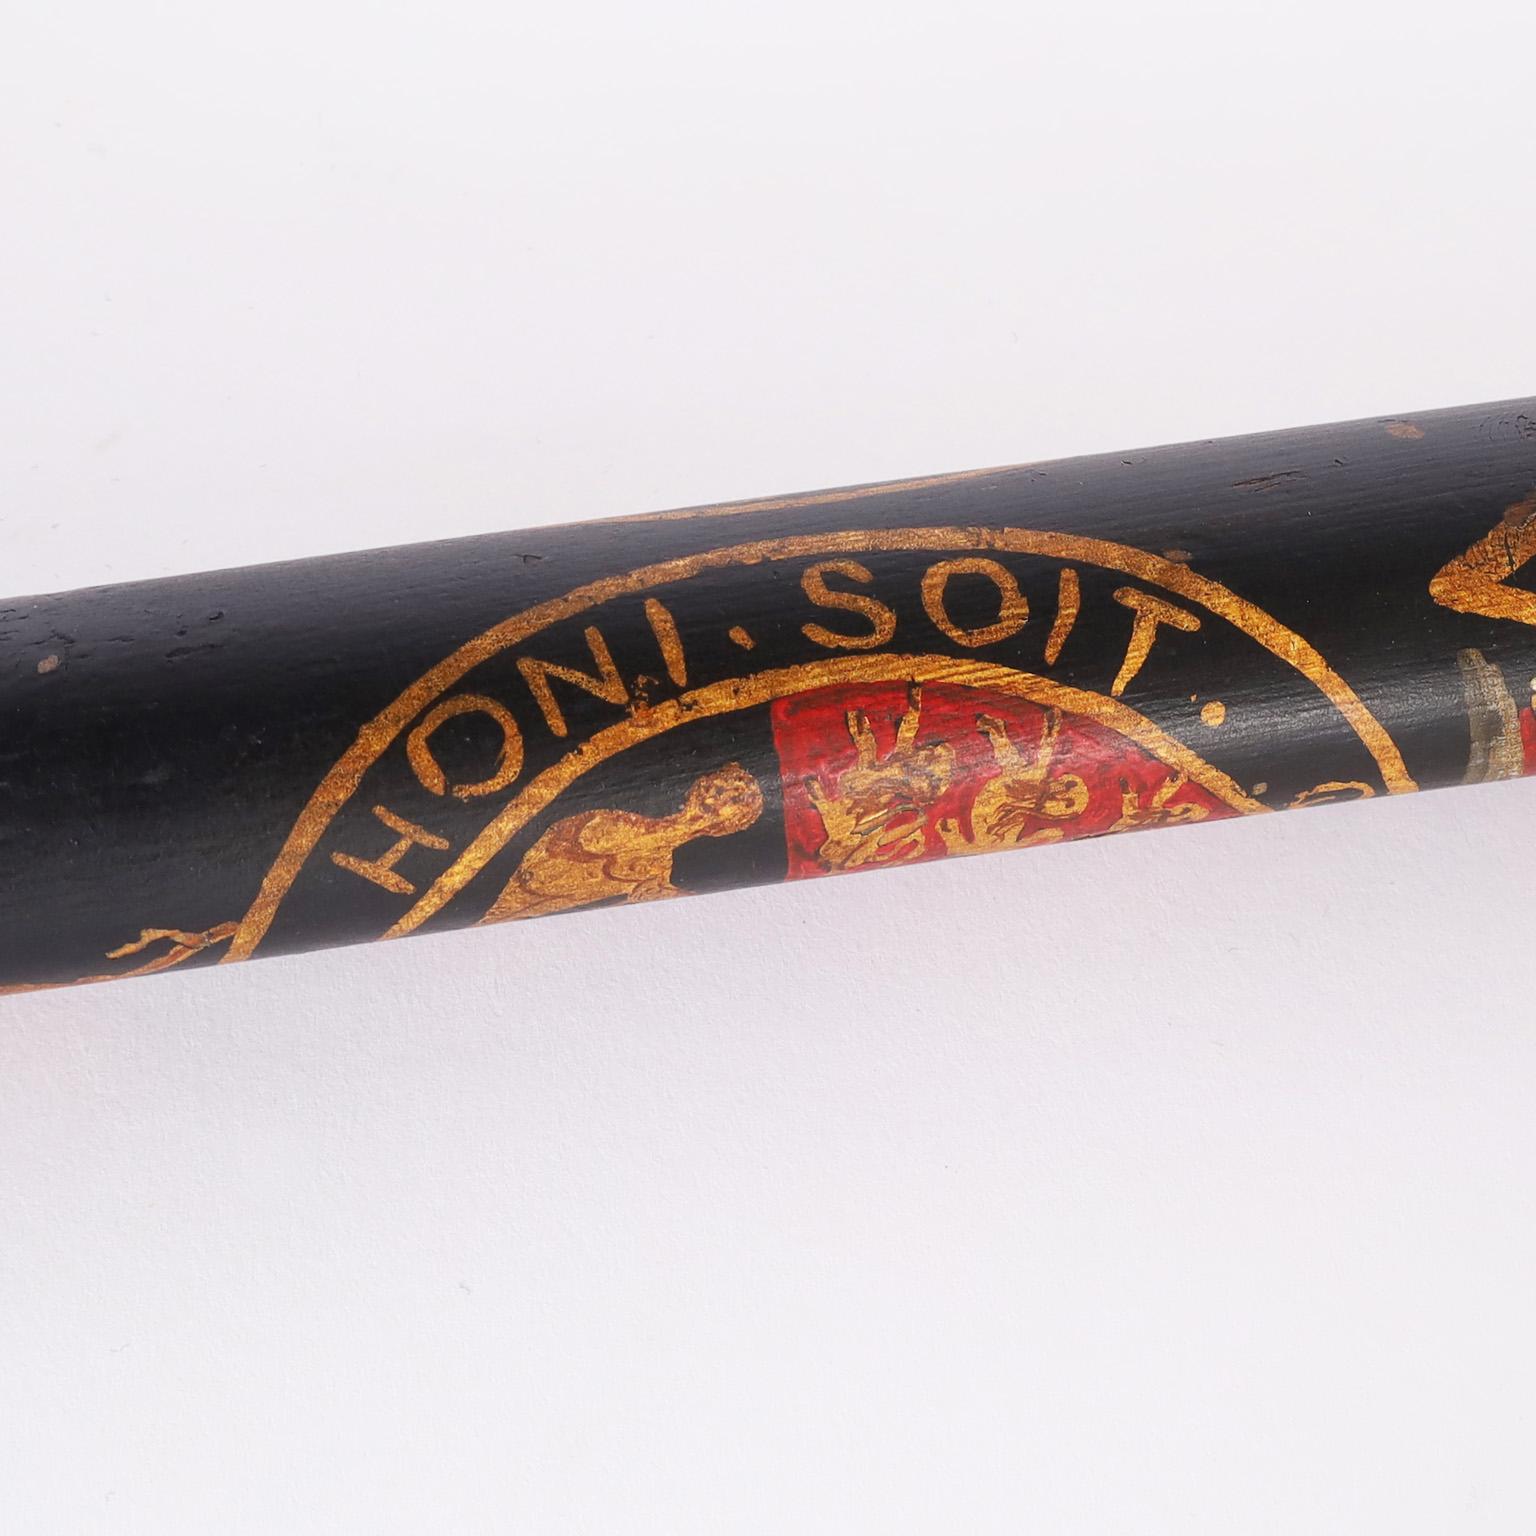 Polychromed Antique English Truncheon with the Garter Coat of Arms